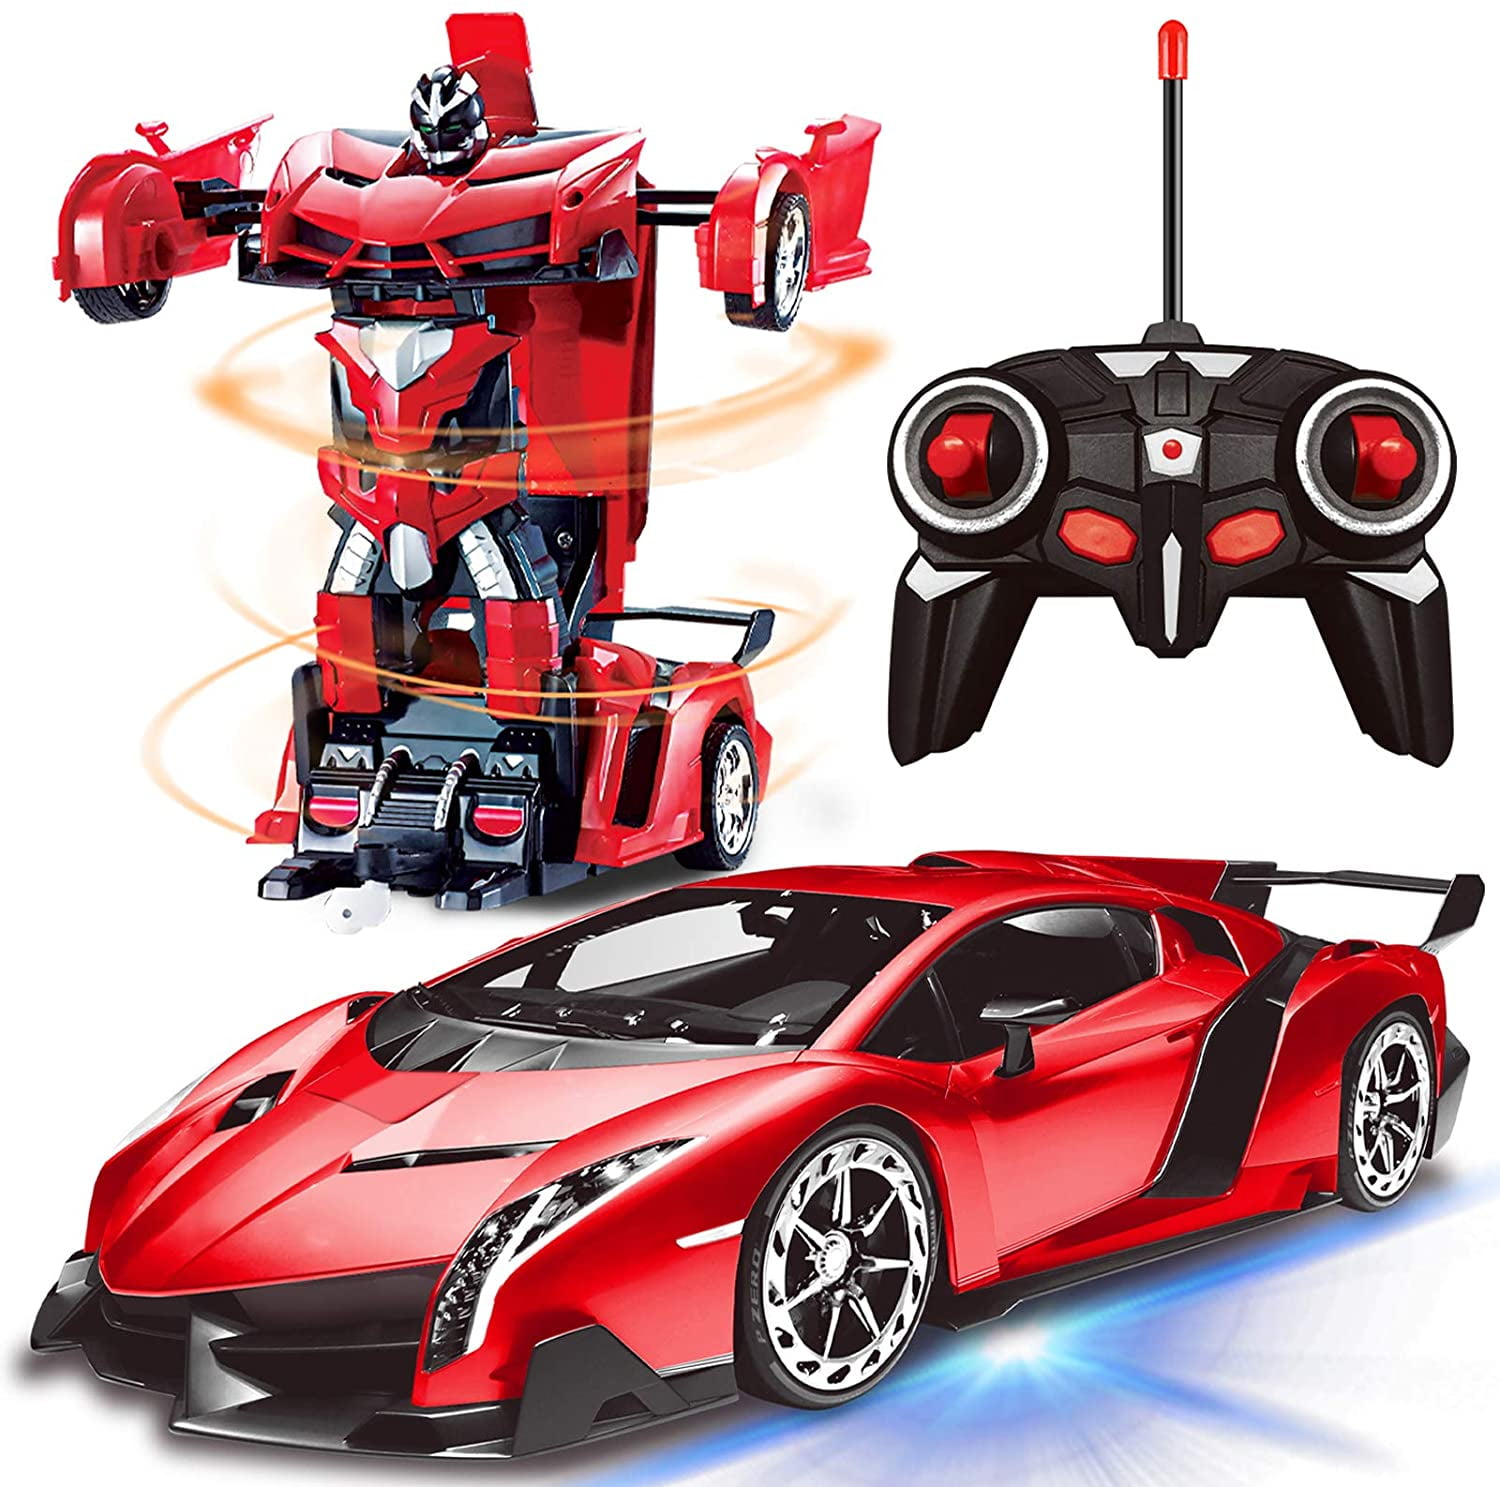 Toys For Boys 4 5 6 7 8 9 11 12 Year Old Age Kids RC Racing Car Robot Bday Gift 